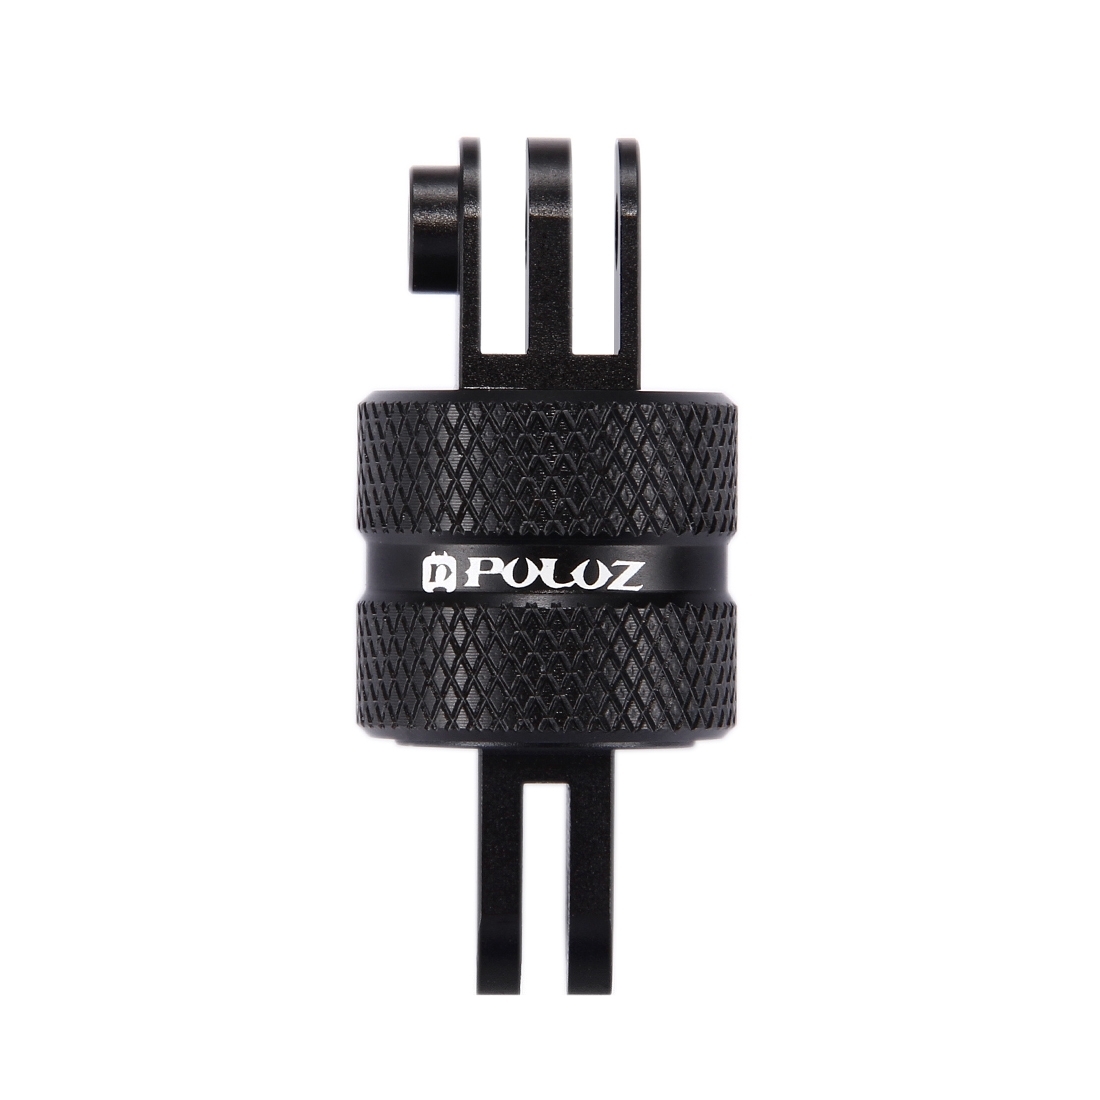 PULUZ 360 Degree Rotation CNC Swivel Pivot Extension Arm Tripod Mount for GoPro, Xiaoyi and other Sp